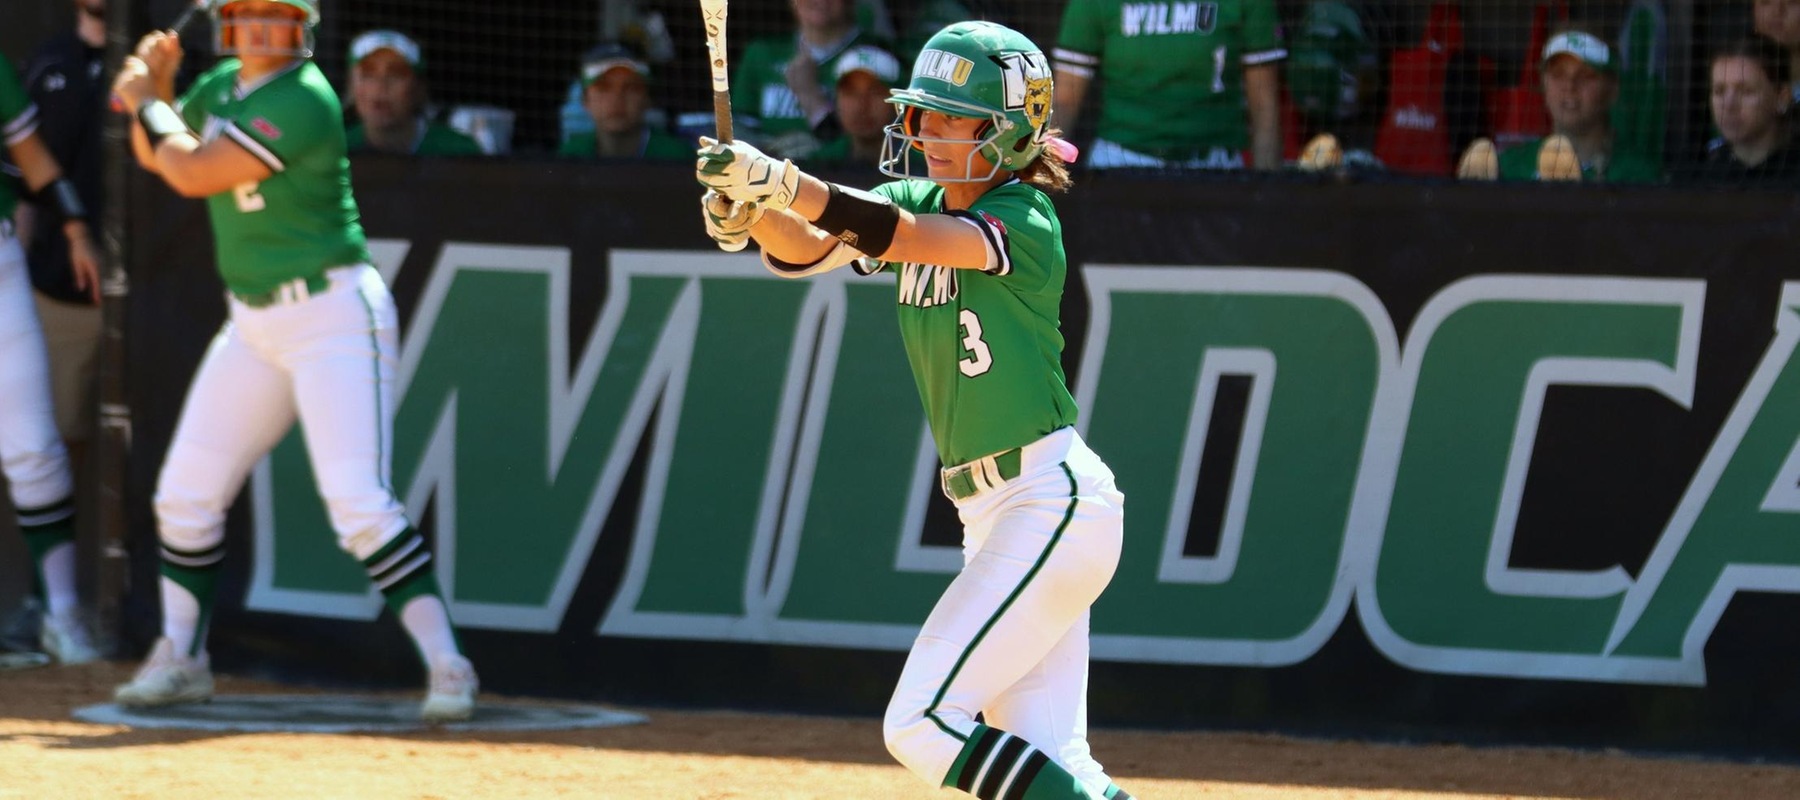 File photo of Lexi Moore who went 5-for-7 with 4 runs scored at Caldwell. Copyright 2022; Wilmington University. All rights reserved. Photo by Dan Lauletta. April 15, 2022 vs. Post.